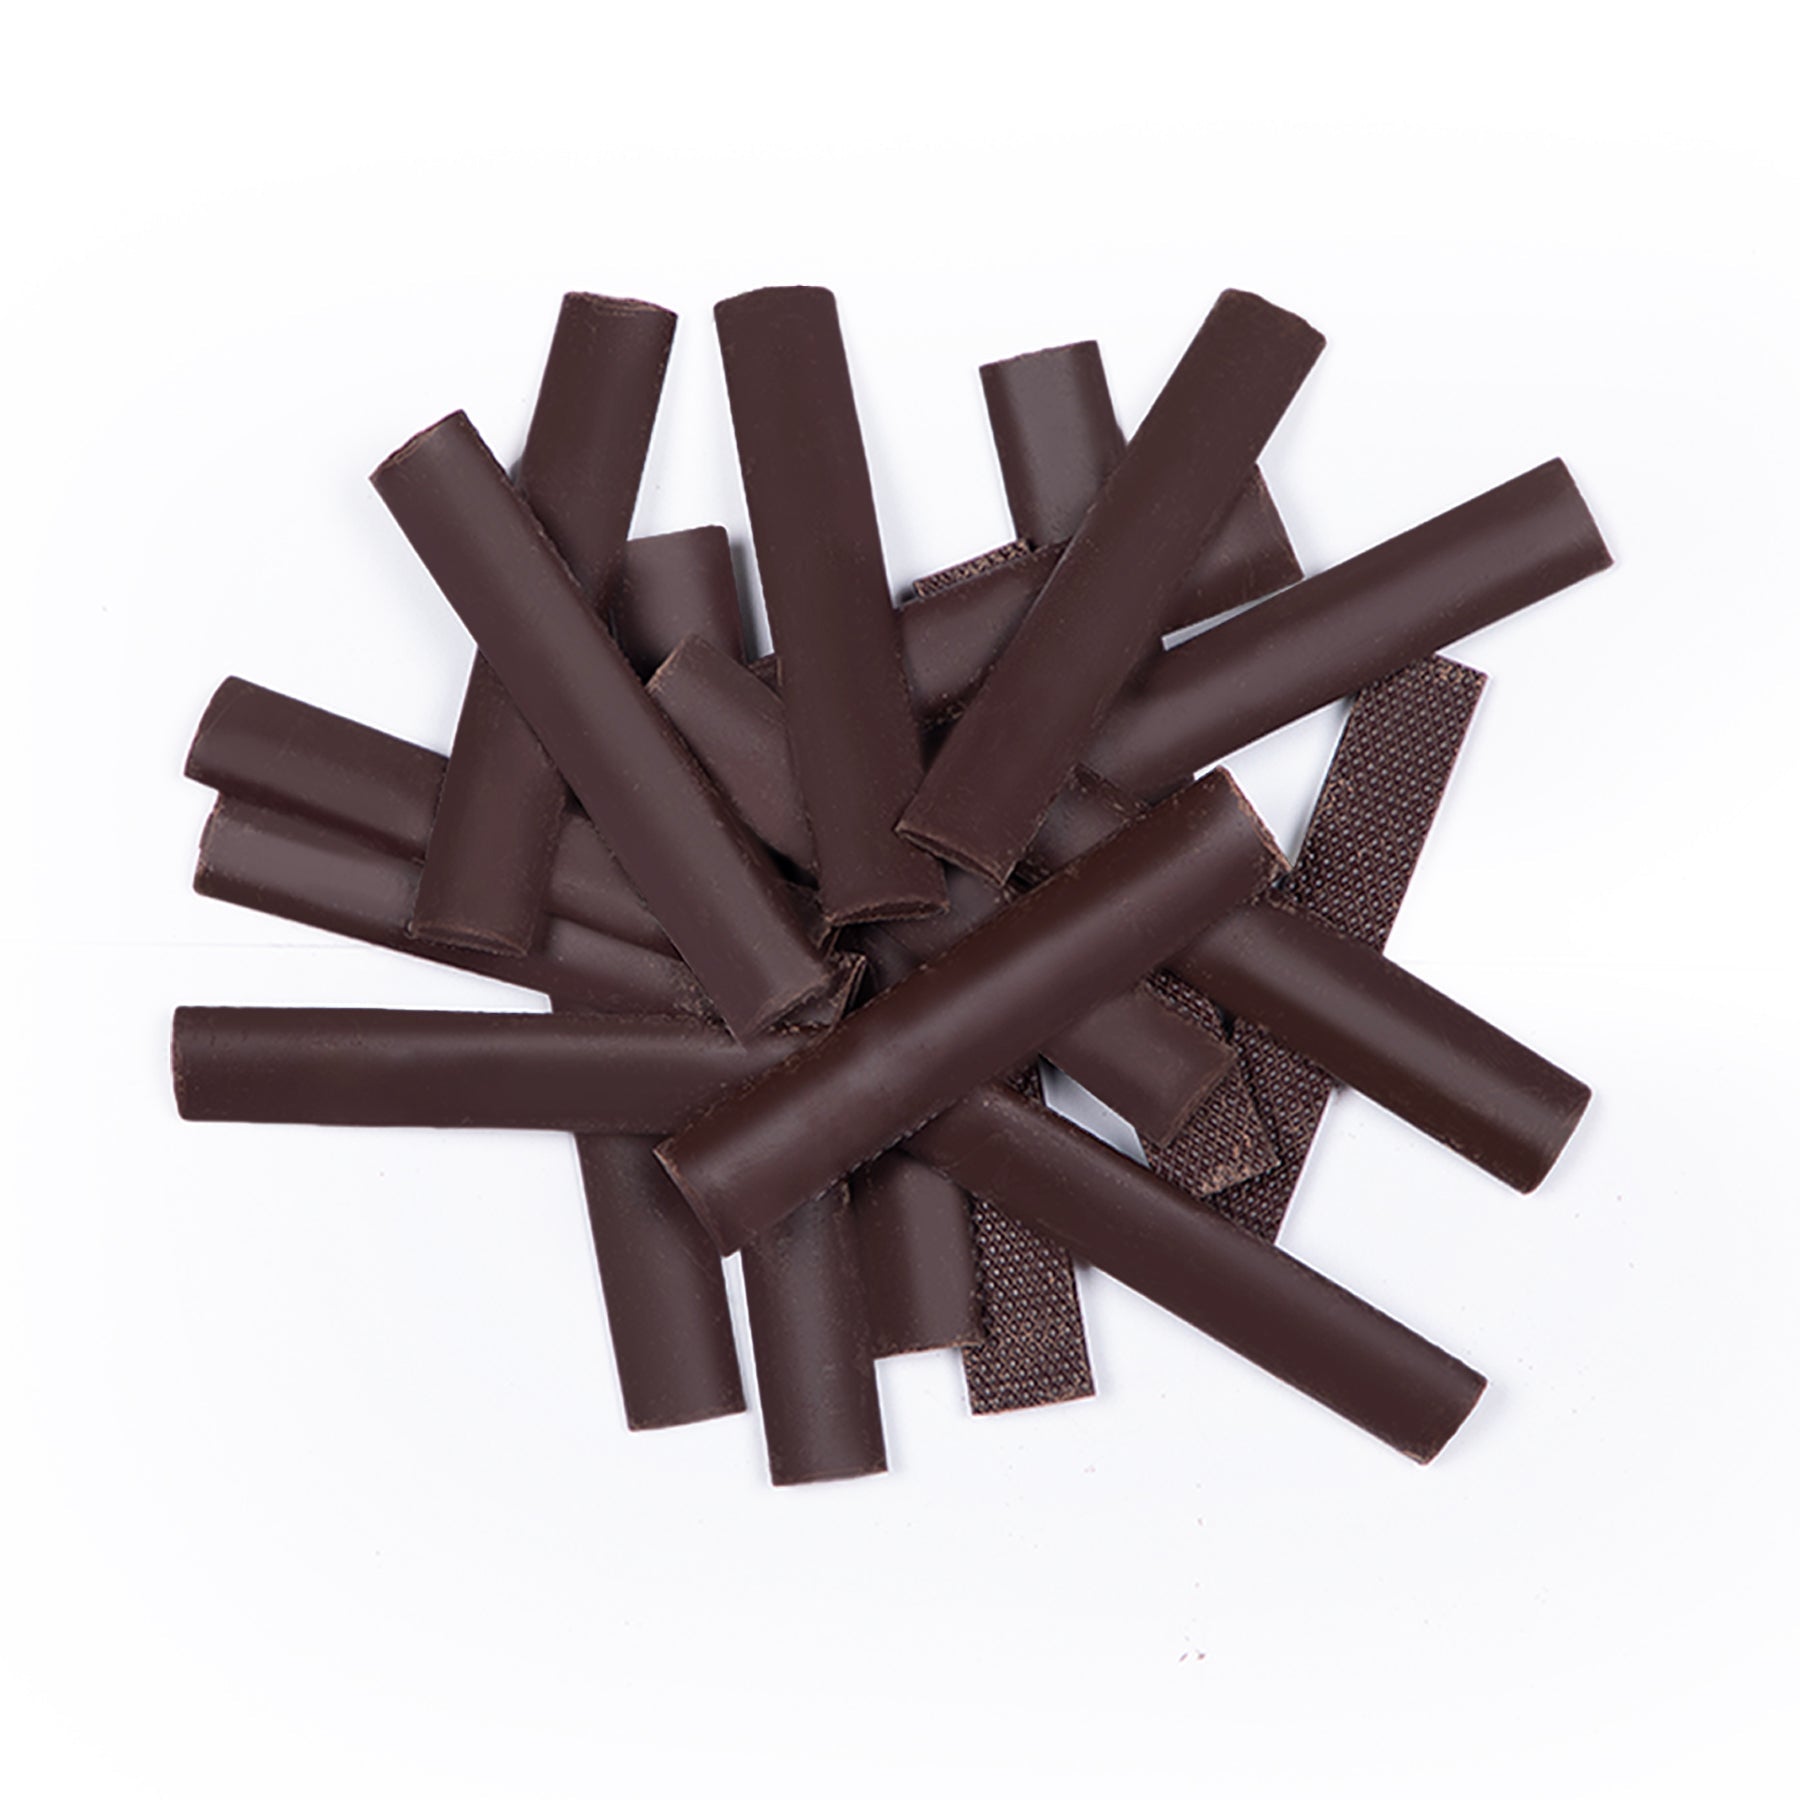 Product view of Tulip Dark Compound Chocolate Batons 1.5kg (SKU: 8994592011136)